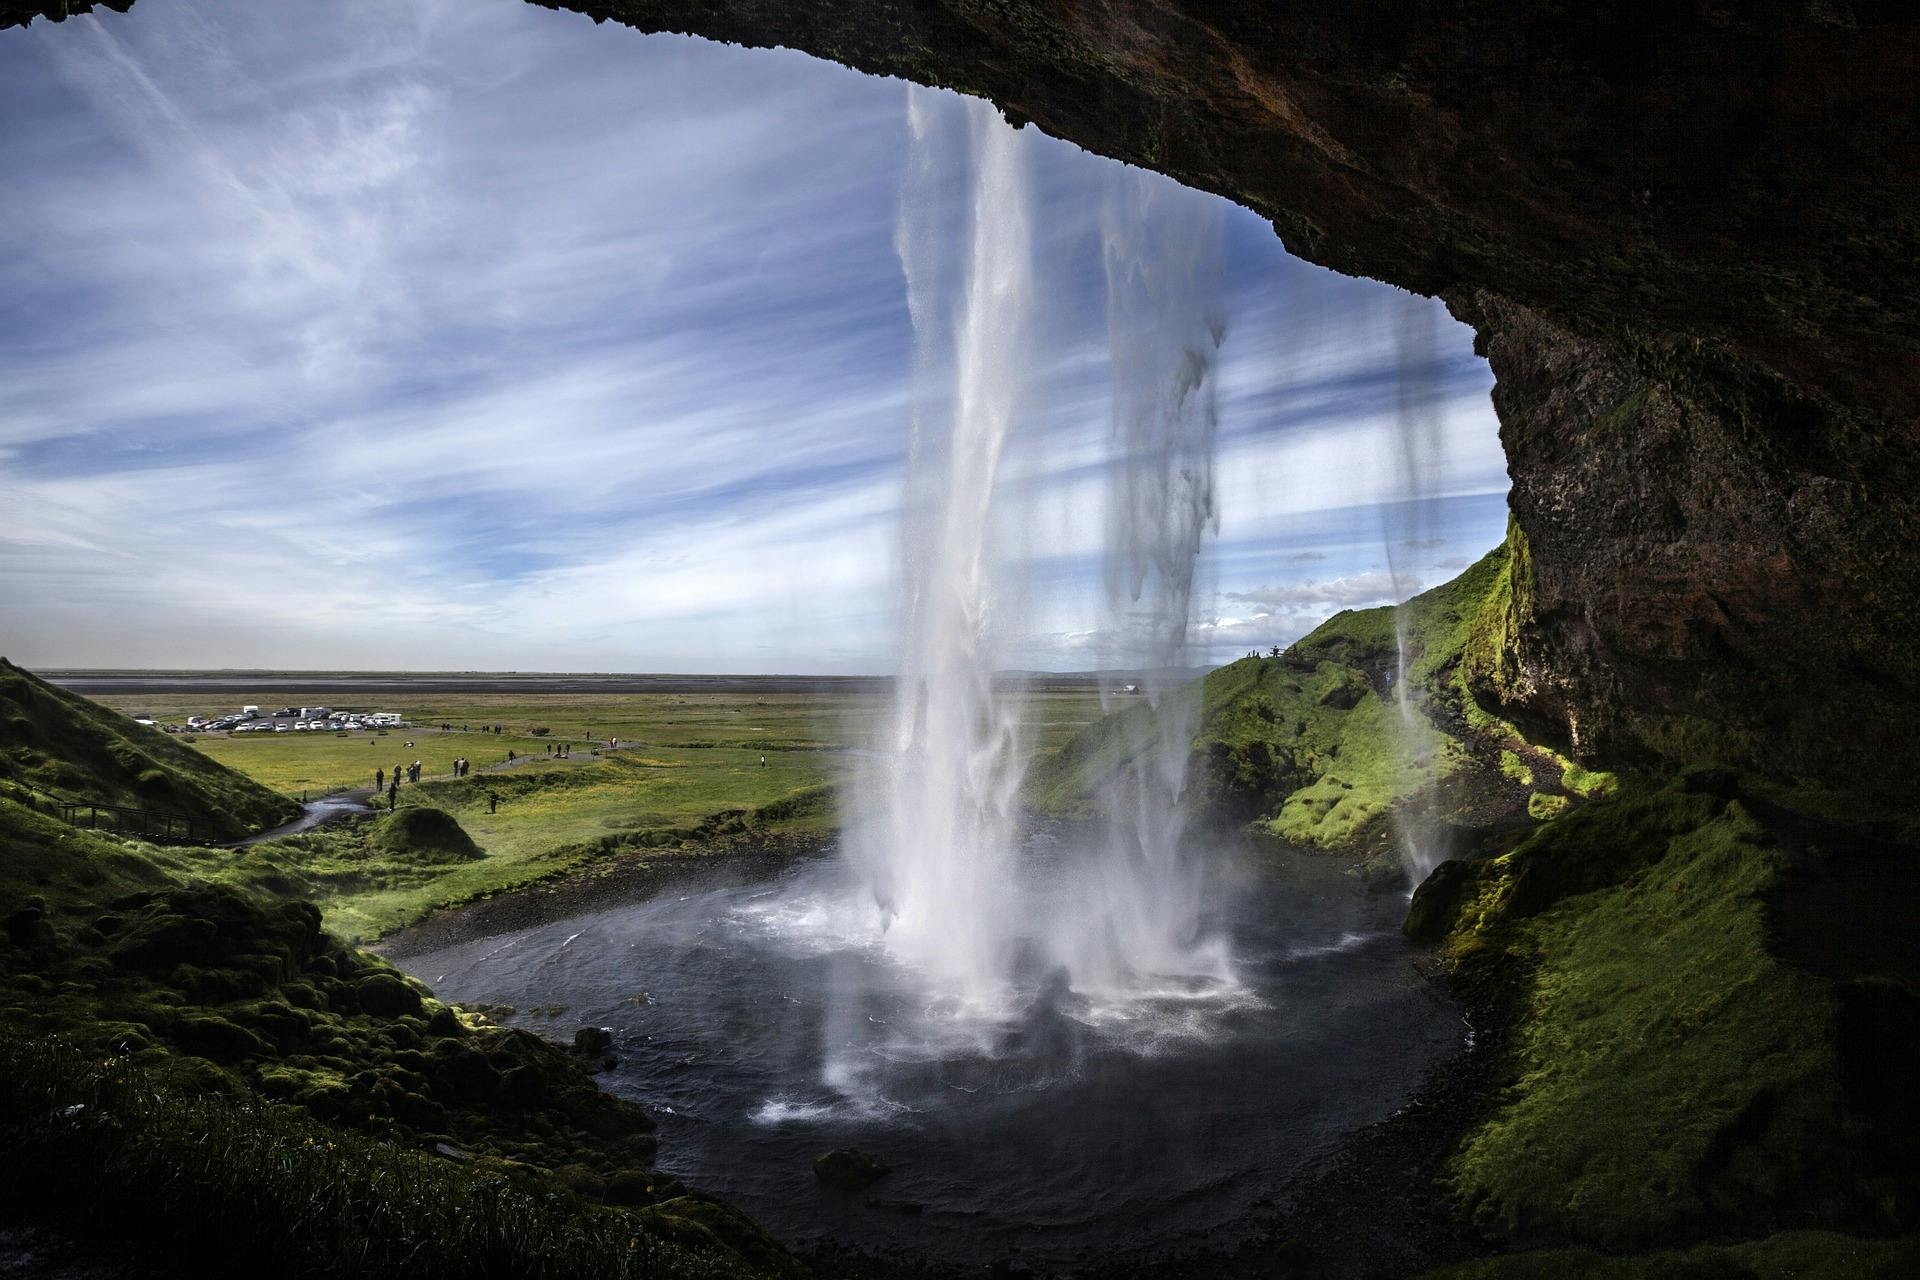 Seljalandsfoss waterfall is located in South Iceland